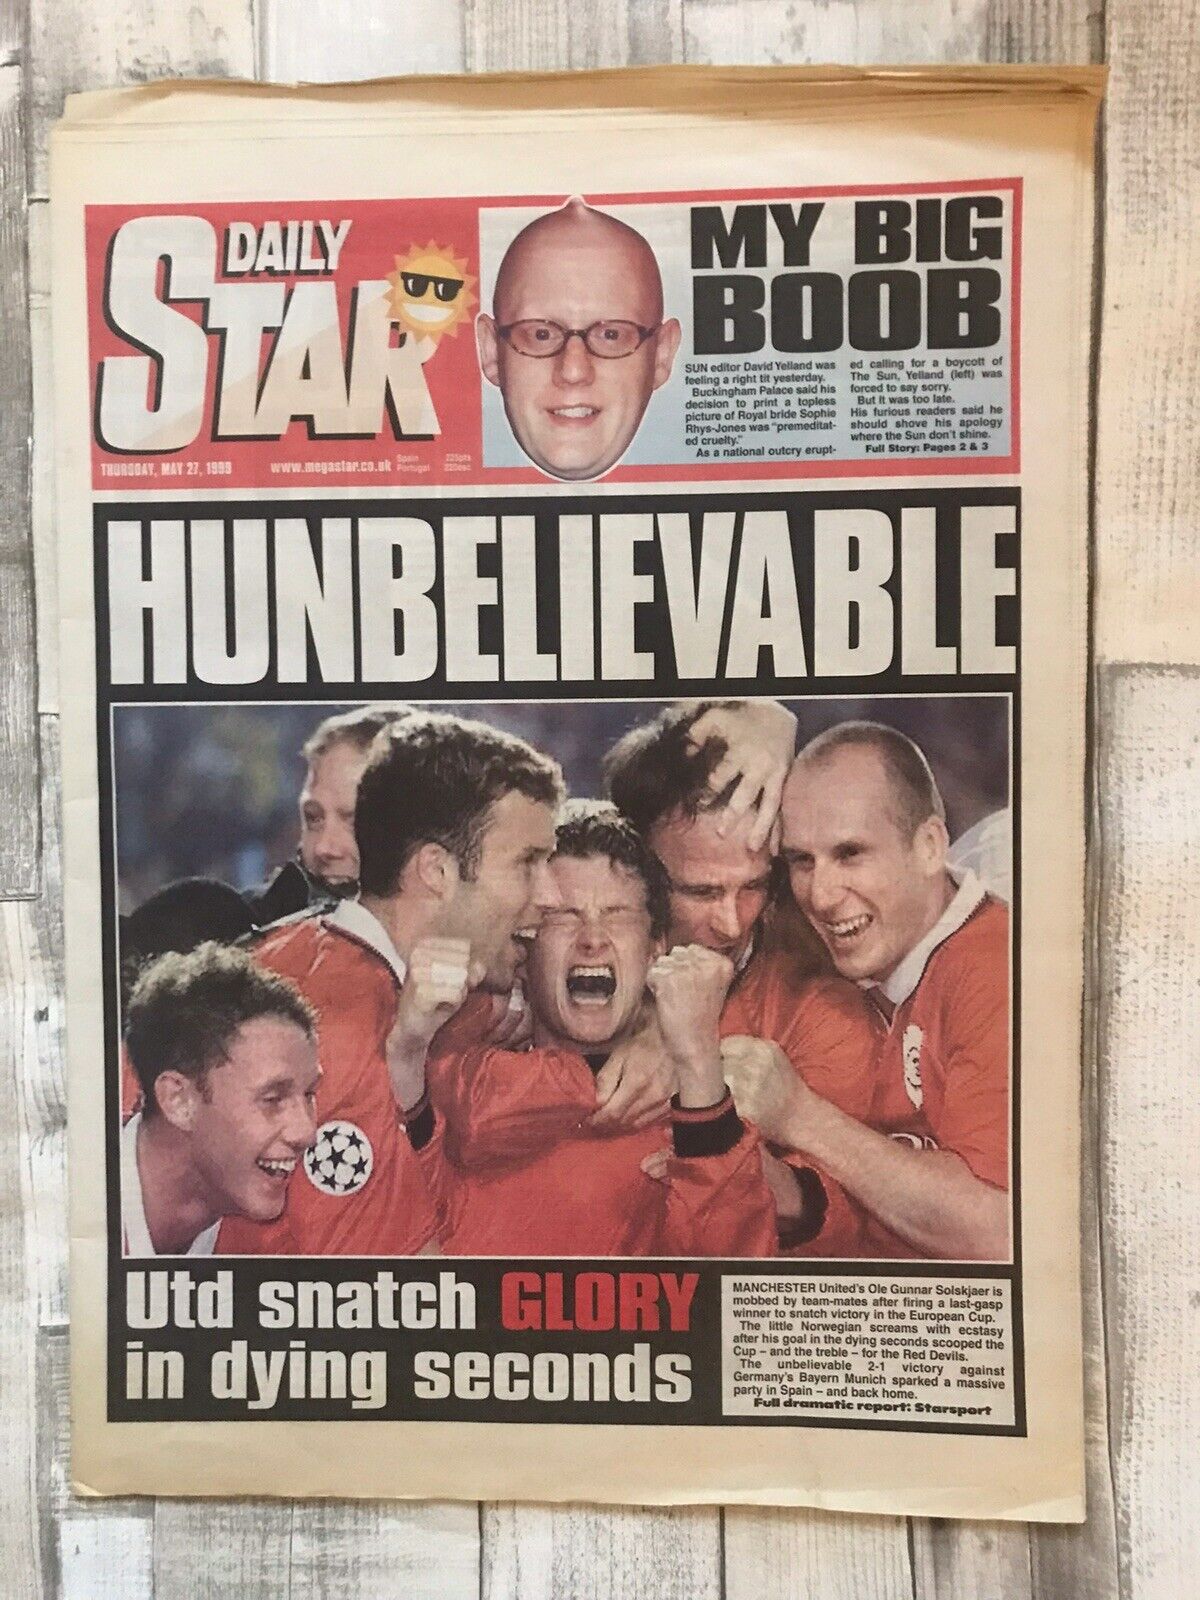 Daily Star Newspaper May 27 1999 Manchester United Treble Spanish Edition